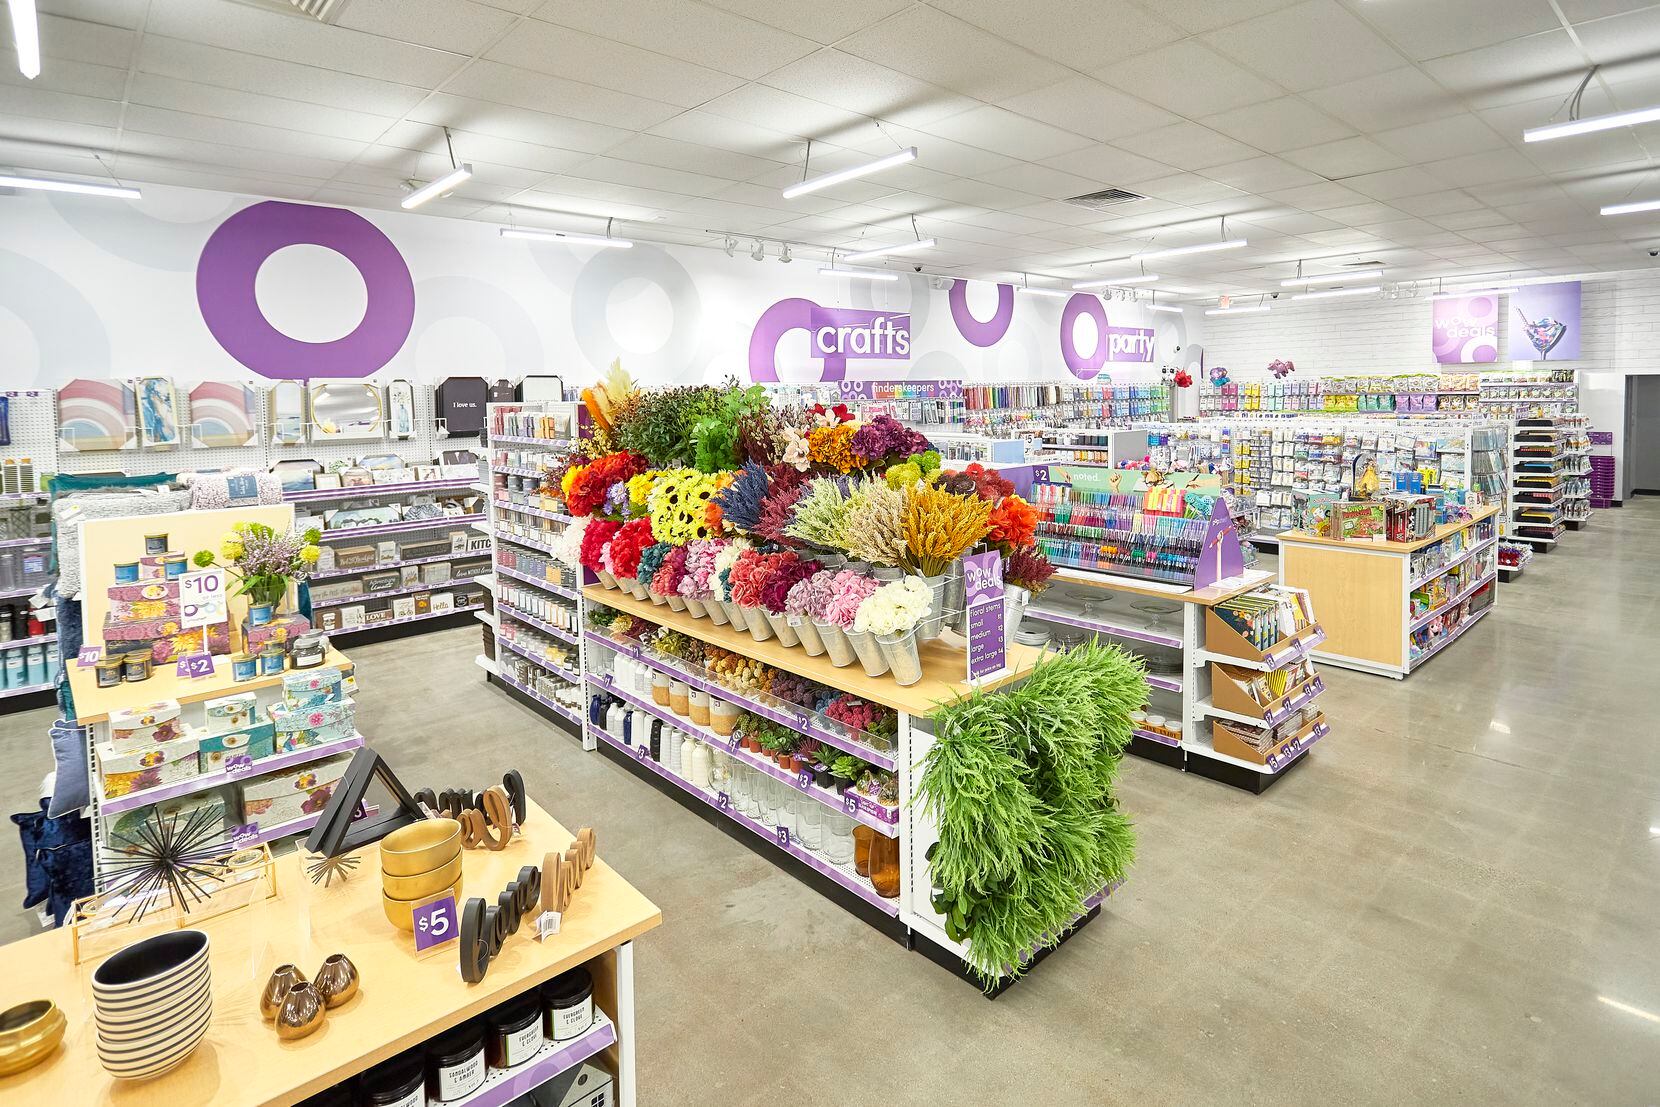 Interior of Dollar General's new concept called Popshelf. The first one in Texas will open in spring 2022 in McKinney at 2821 Craig Drive.